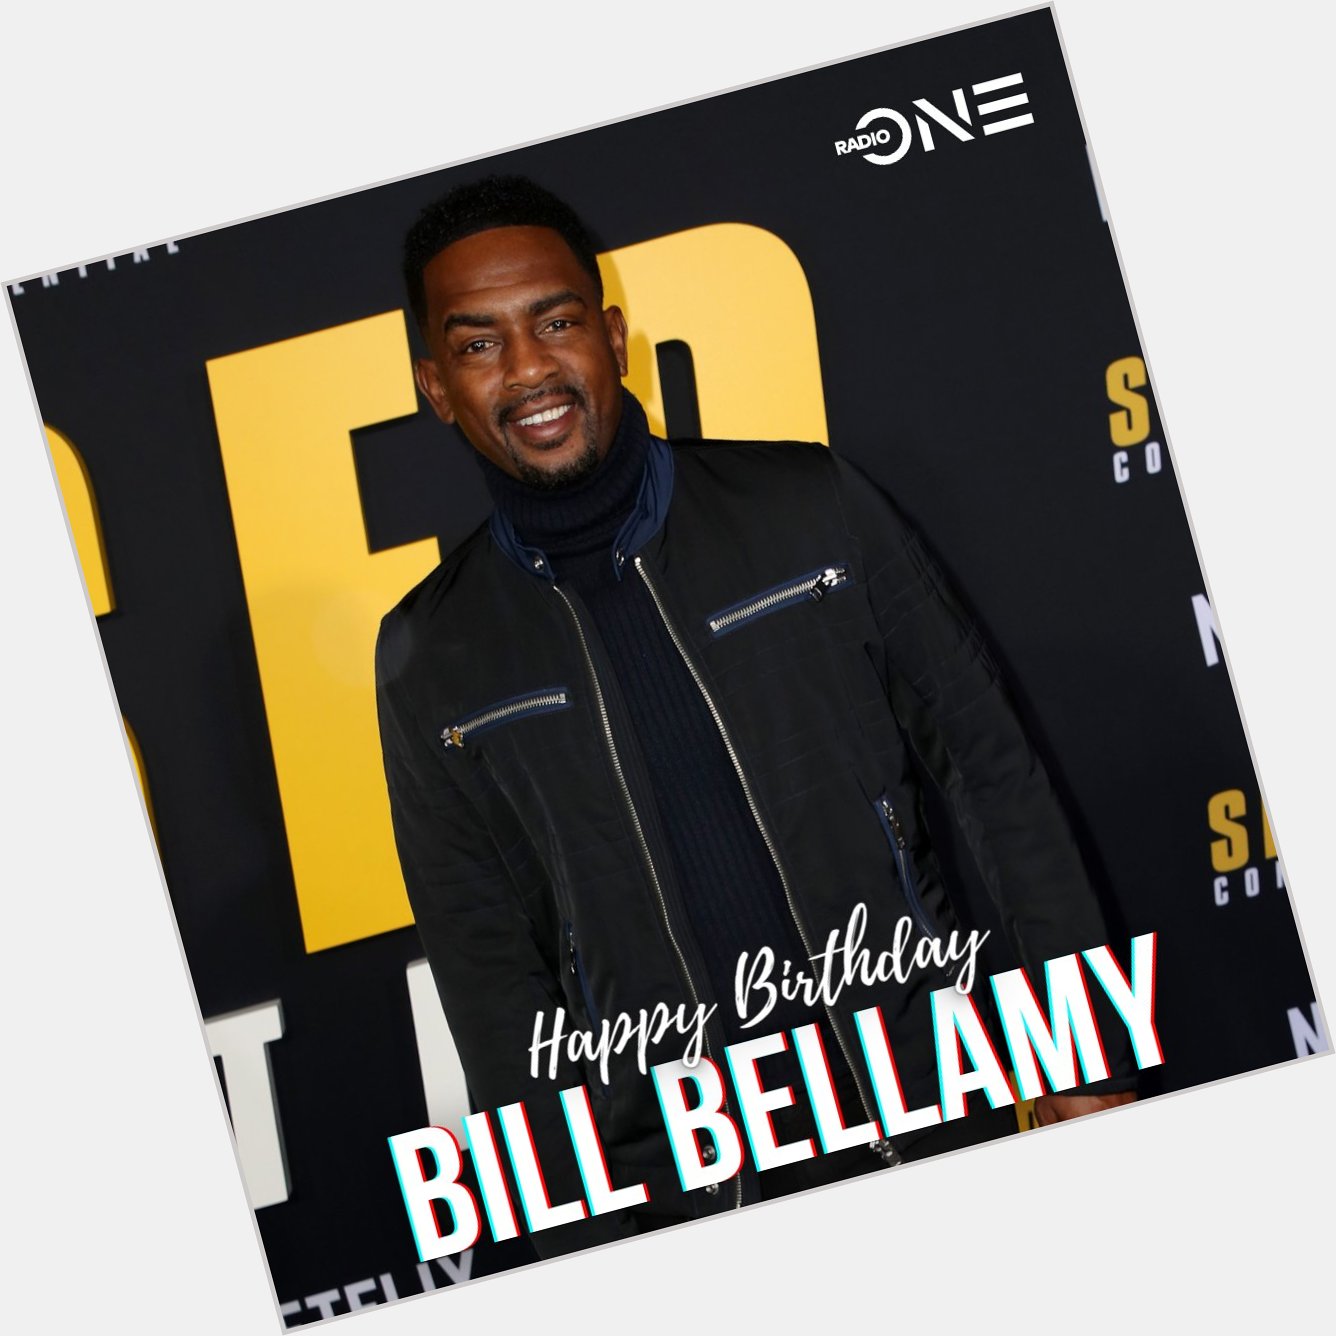 Happy birthday to one of our favorite comedians, Bill Bellamy!  